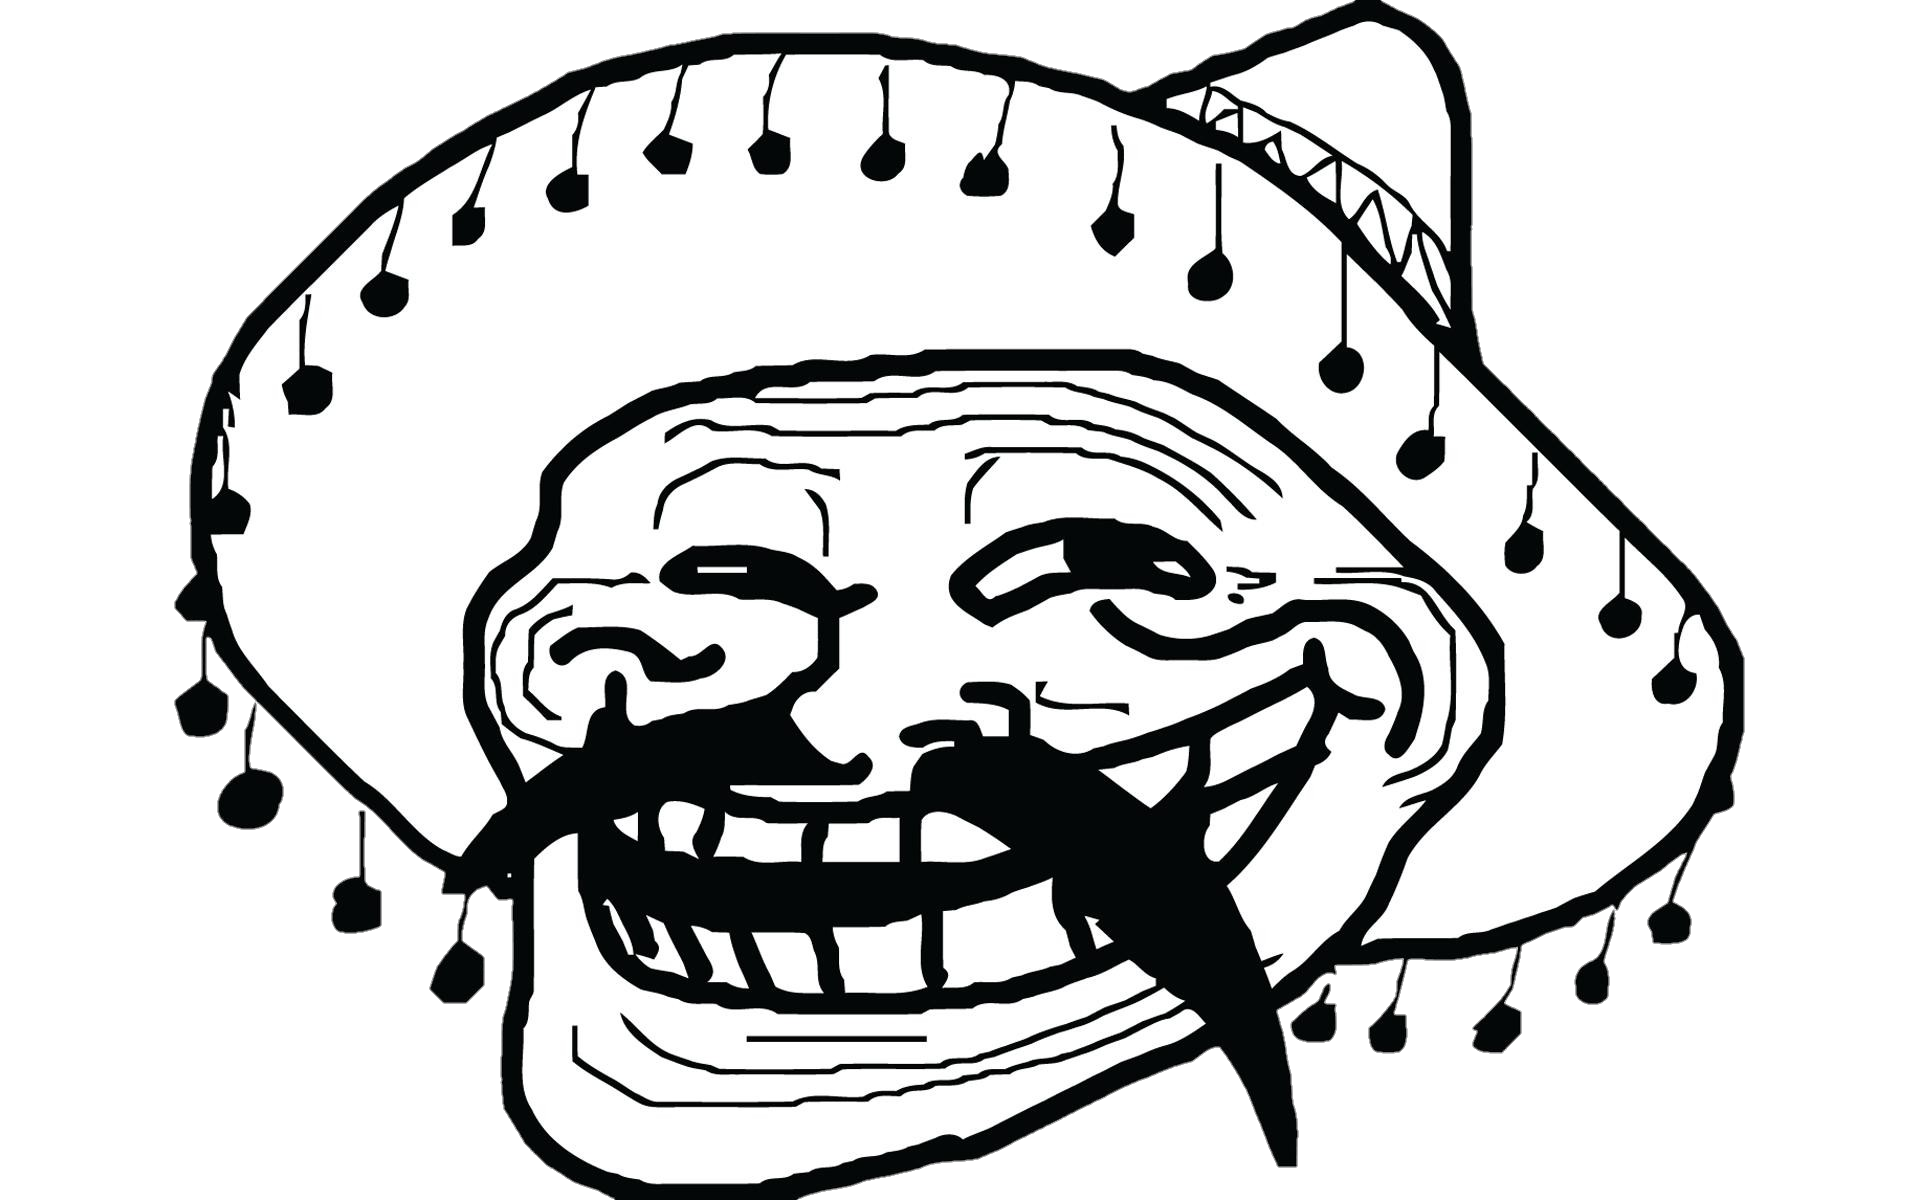 trollface-png-from-pngfre-7